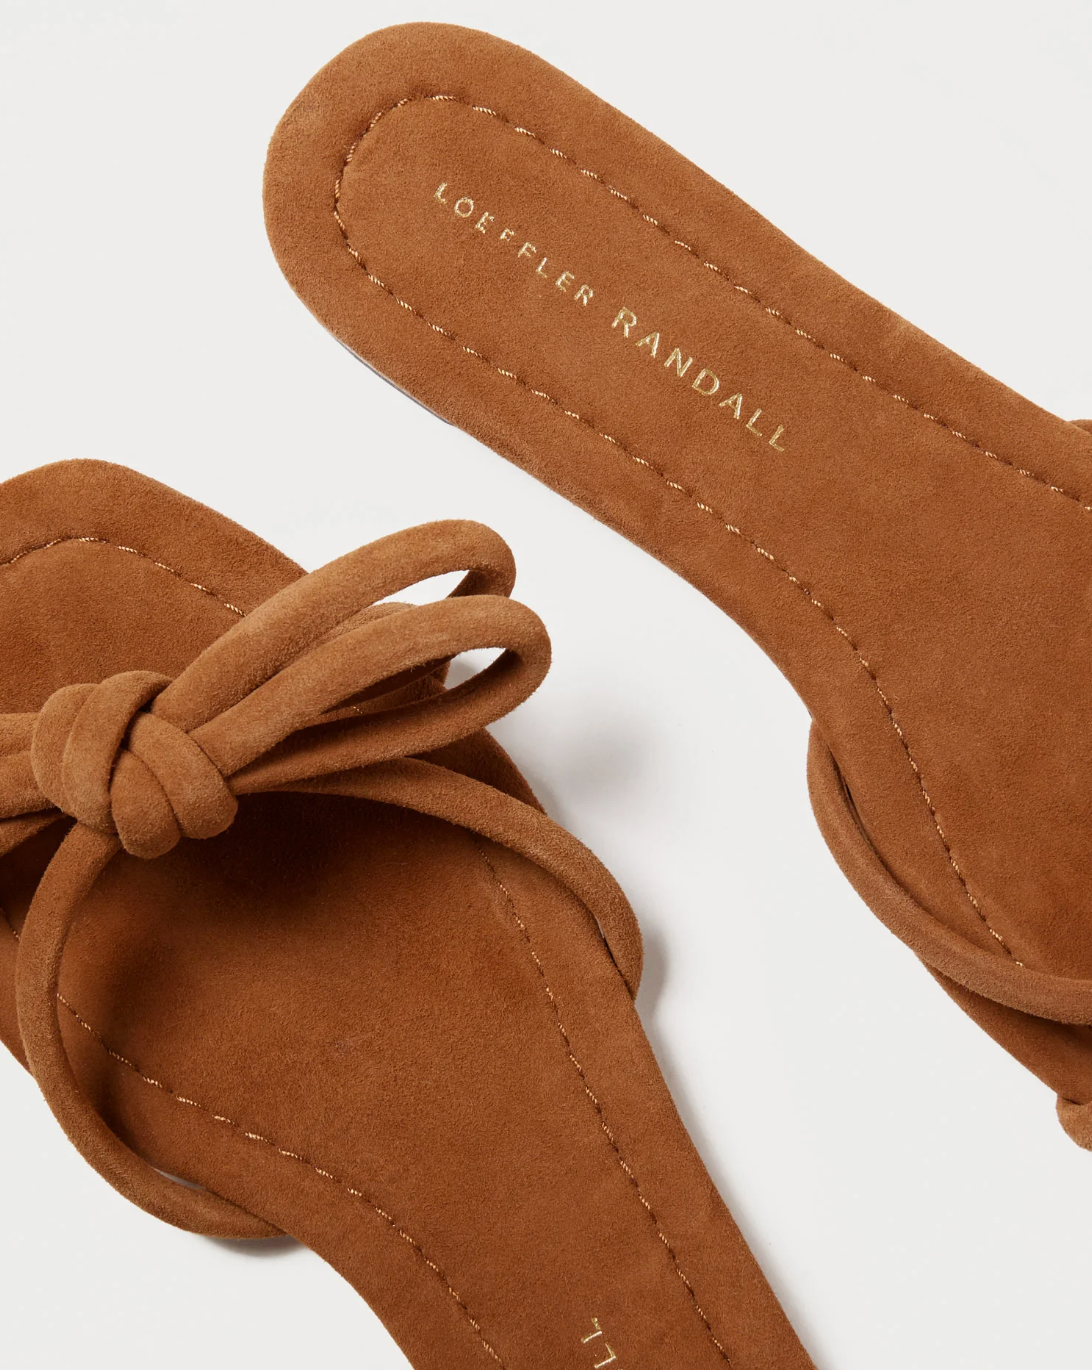 Hadley Leather Bow Flat Sandal - Cacao